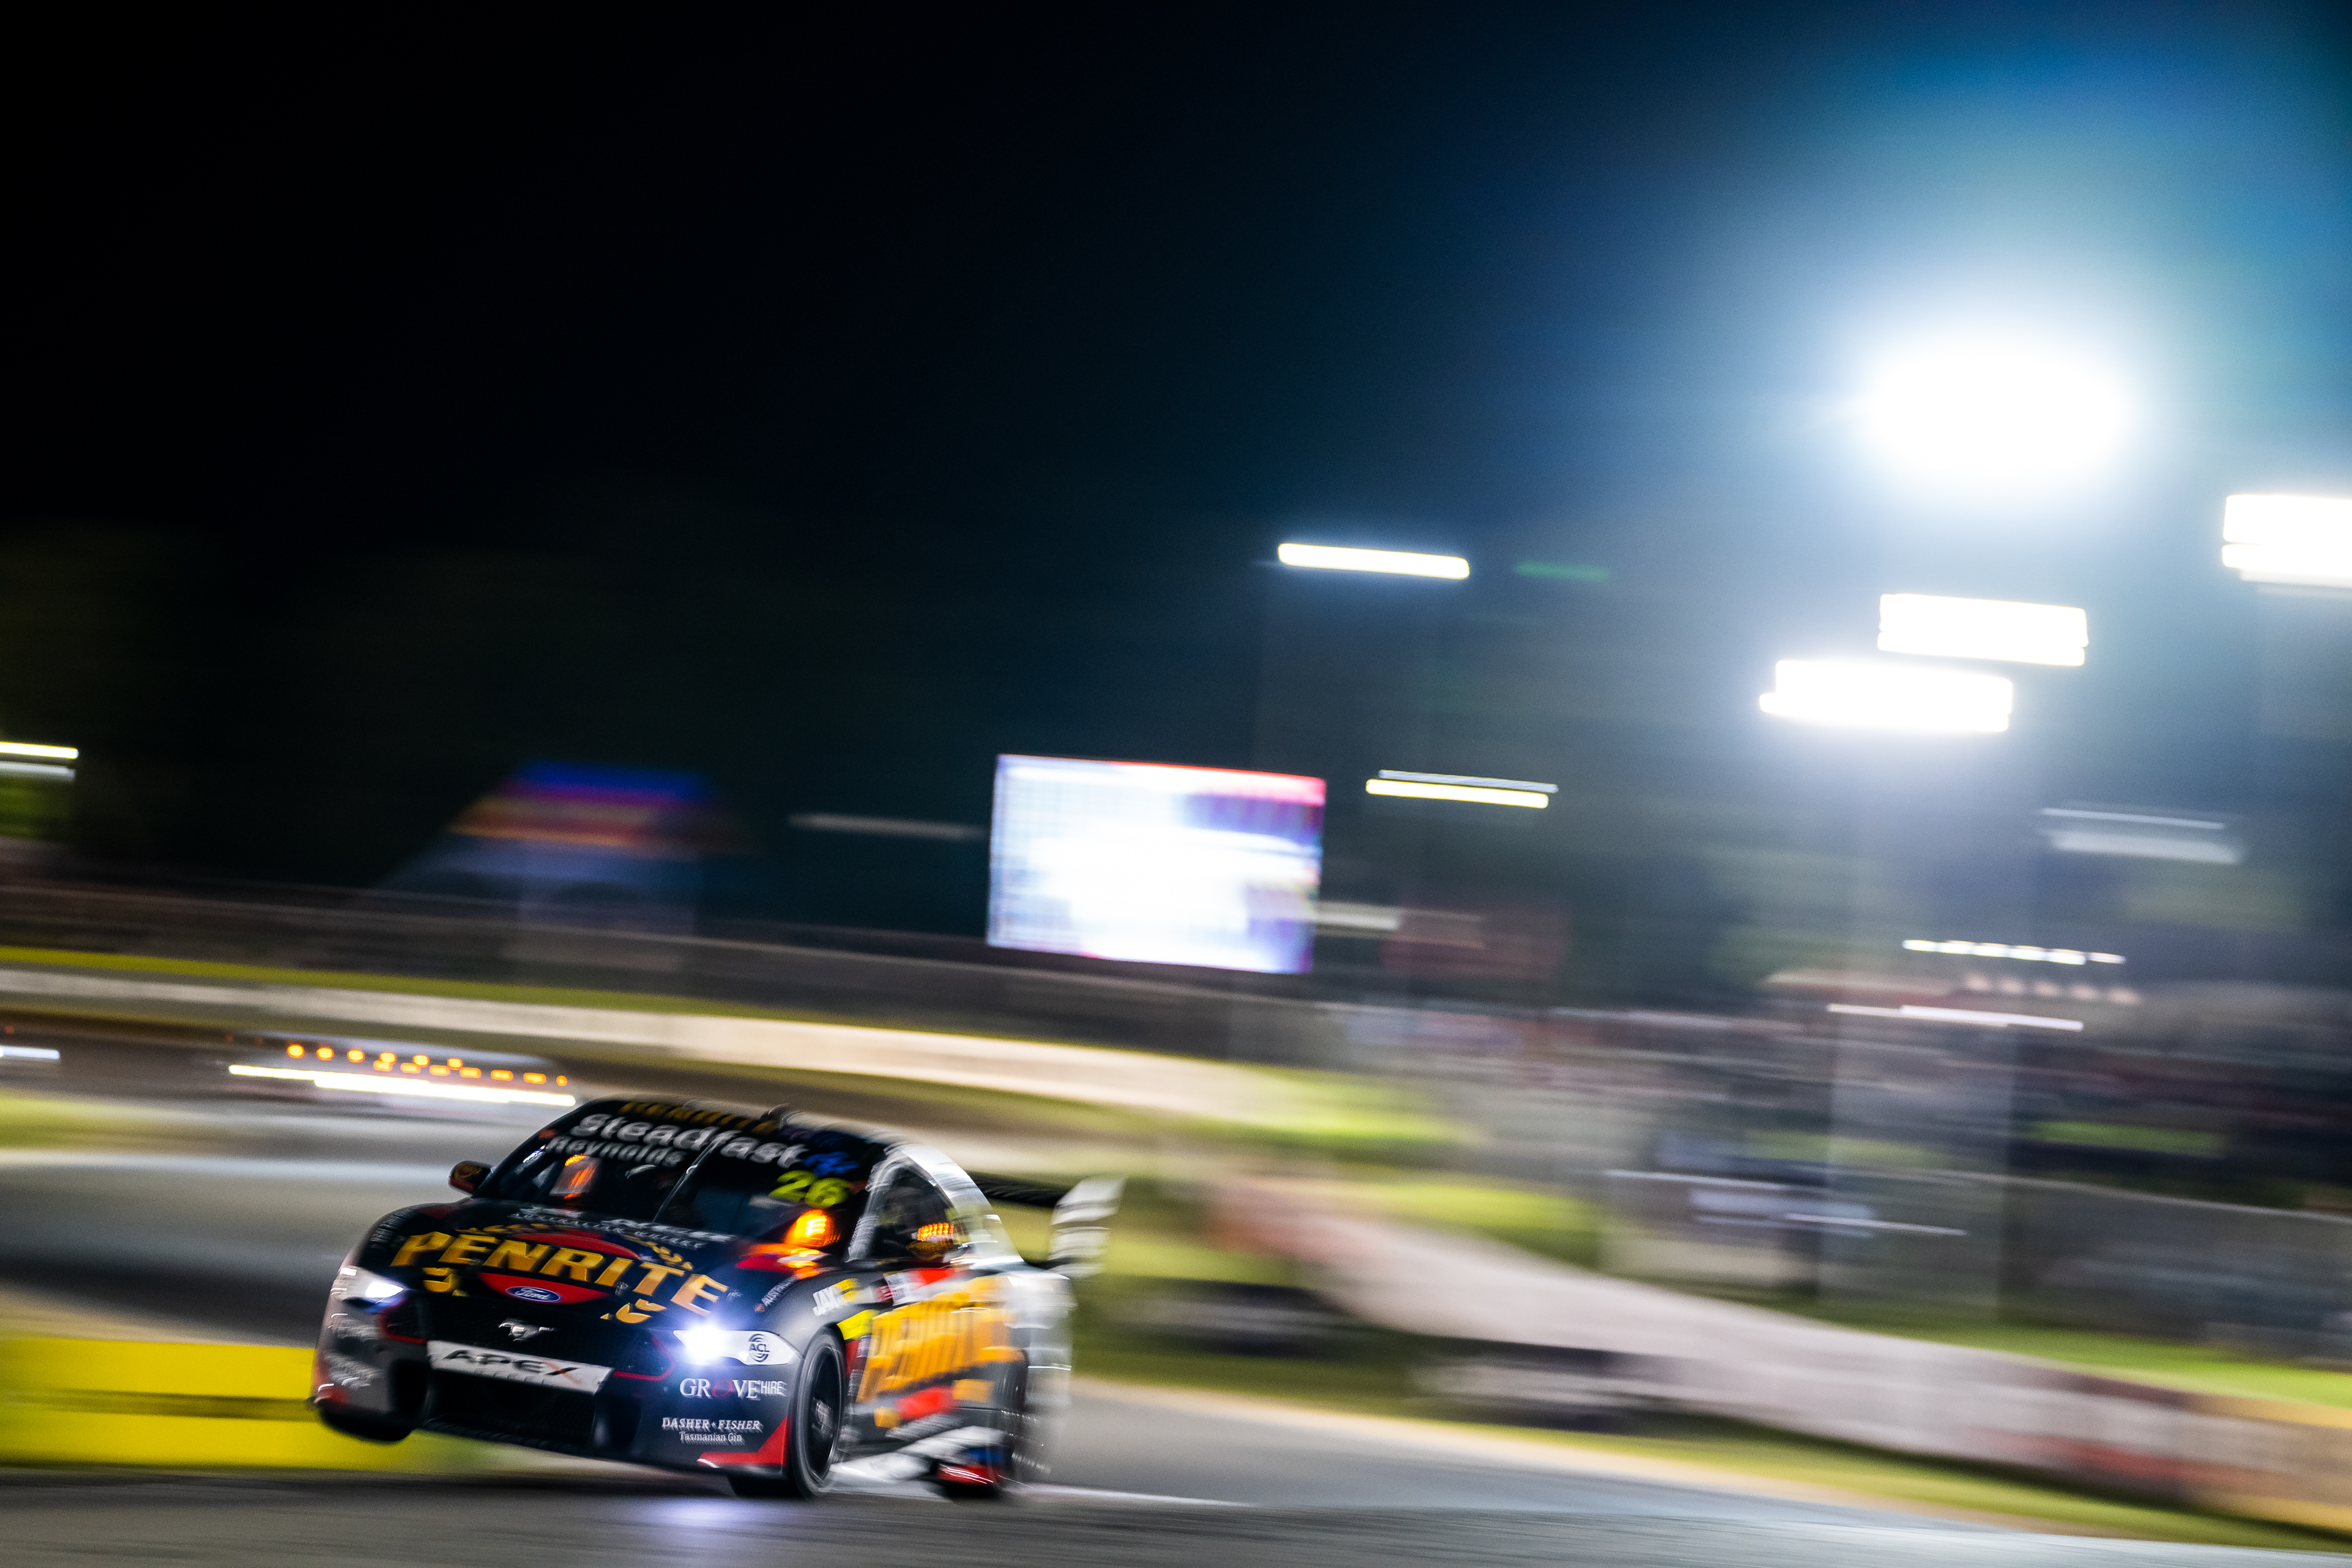 David Reynolds driver of the #26 Penrite Racing Ford Mustang during the Perth Supernight round of the 2022 Supercars Championship Season at Wanneroo Raceway on April 30, 2022 in Perth, Australia. (Photo by Daniel Kalisz/Getty Images)